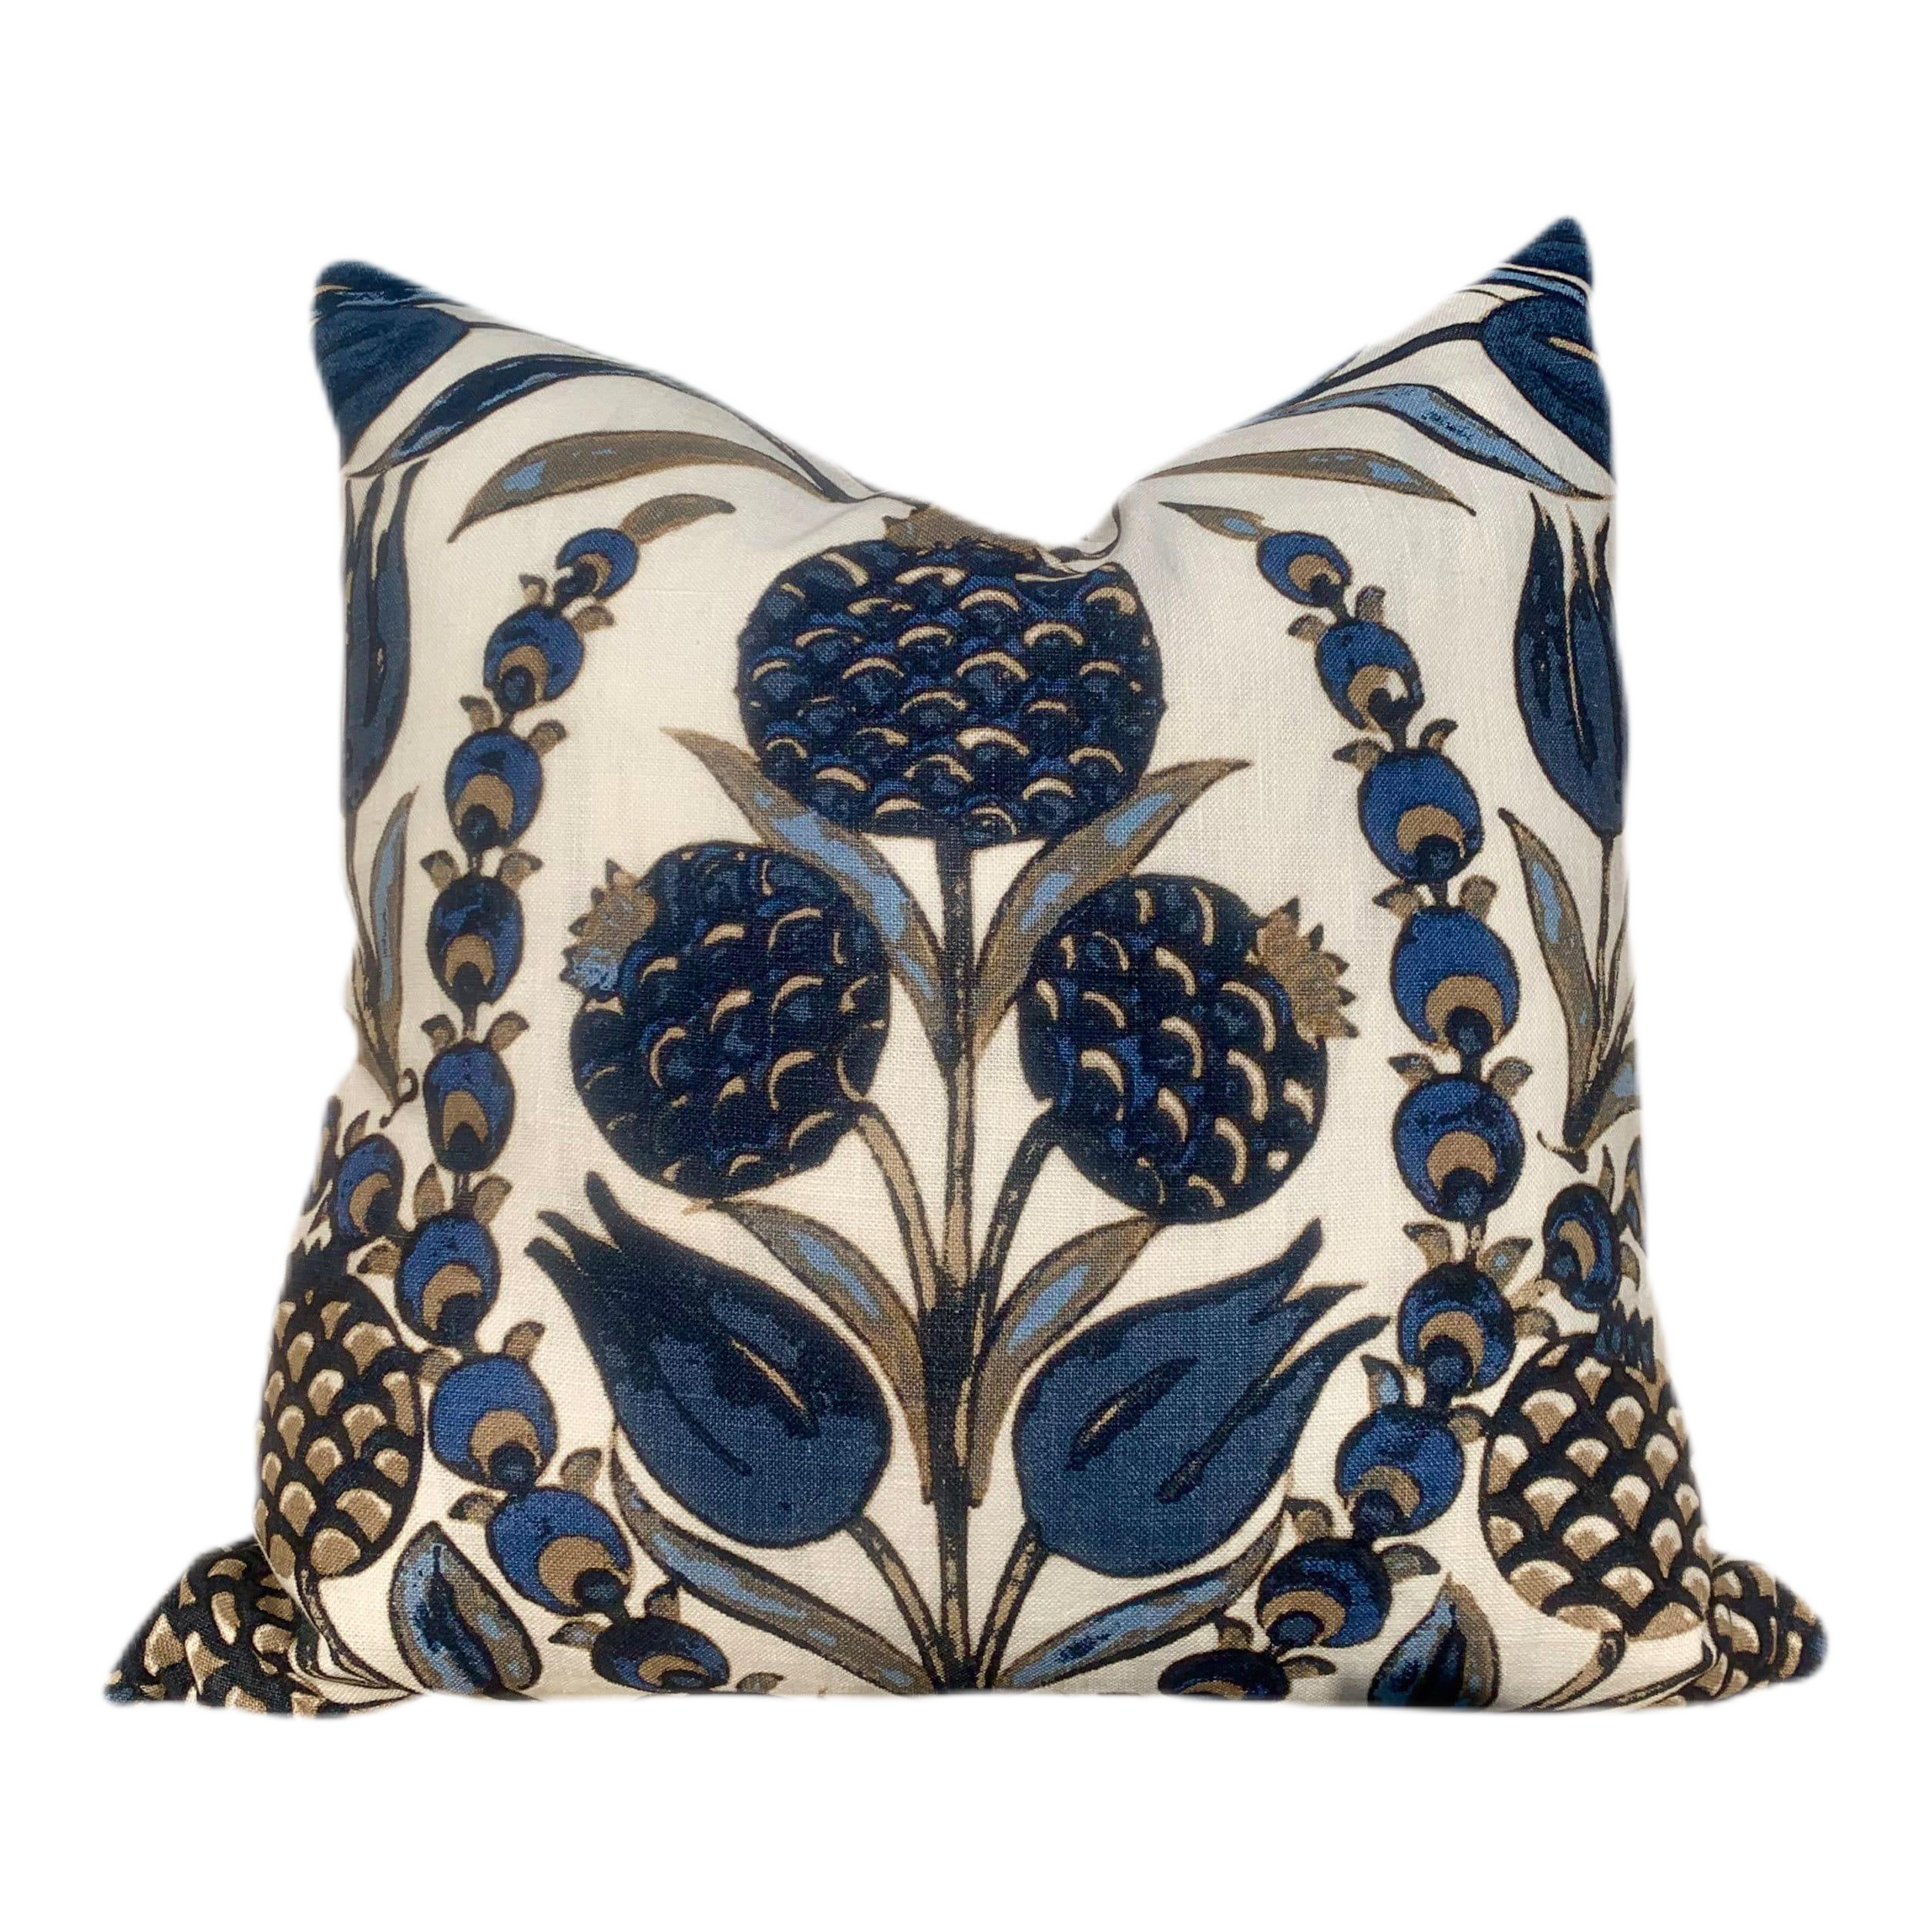 Thibaut Corneila Pillow Navy in Blue and Beige.